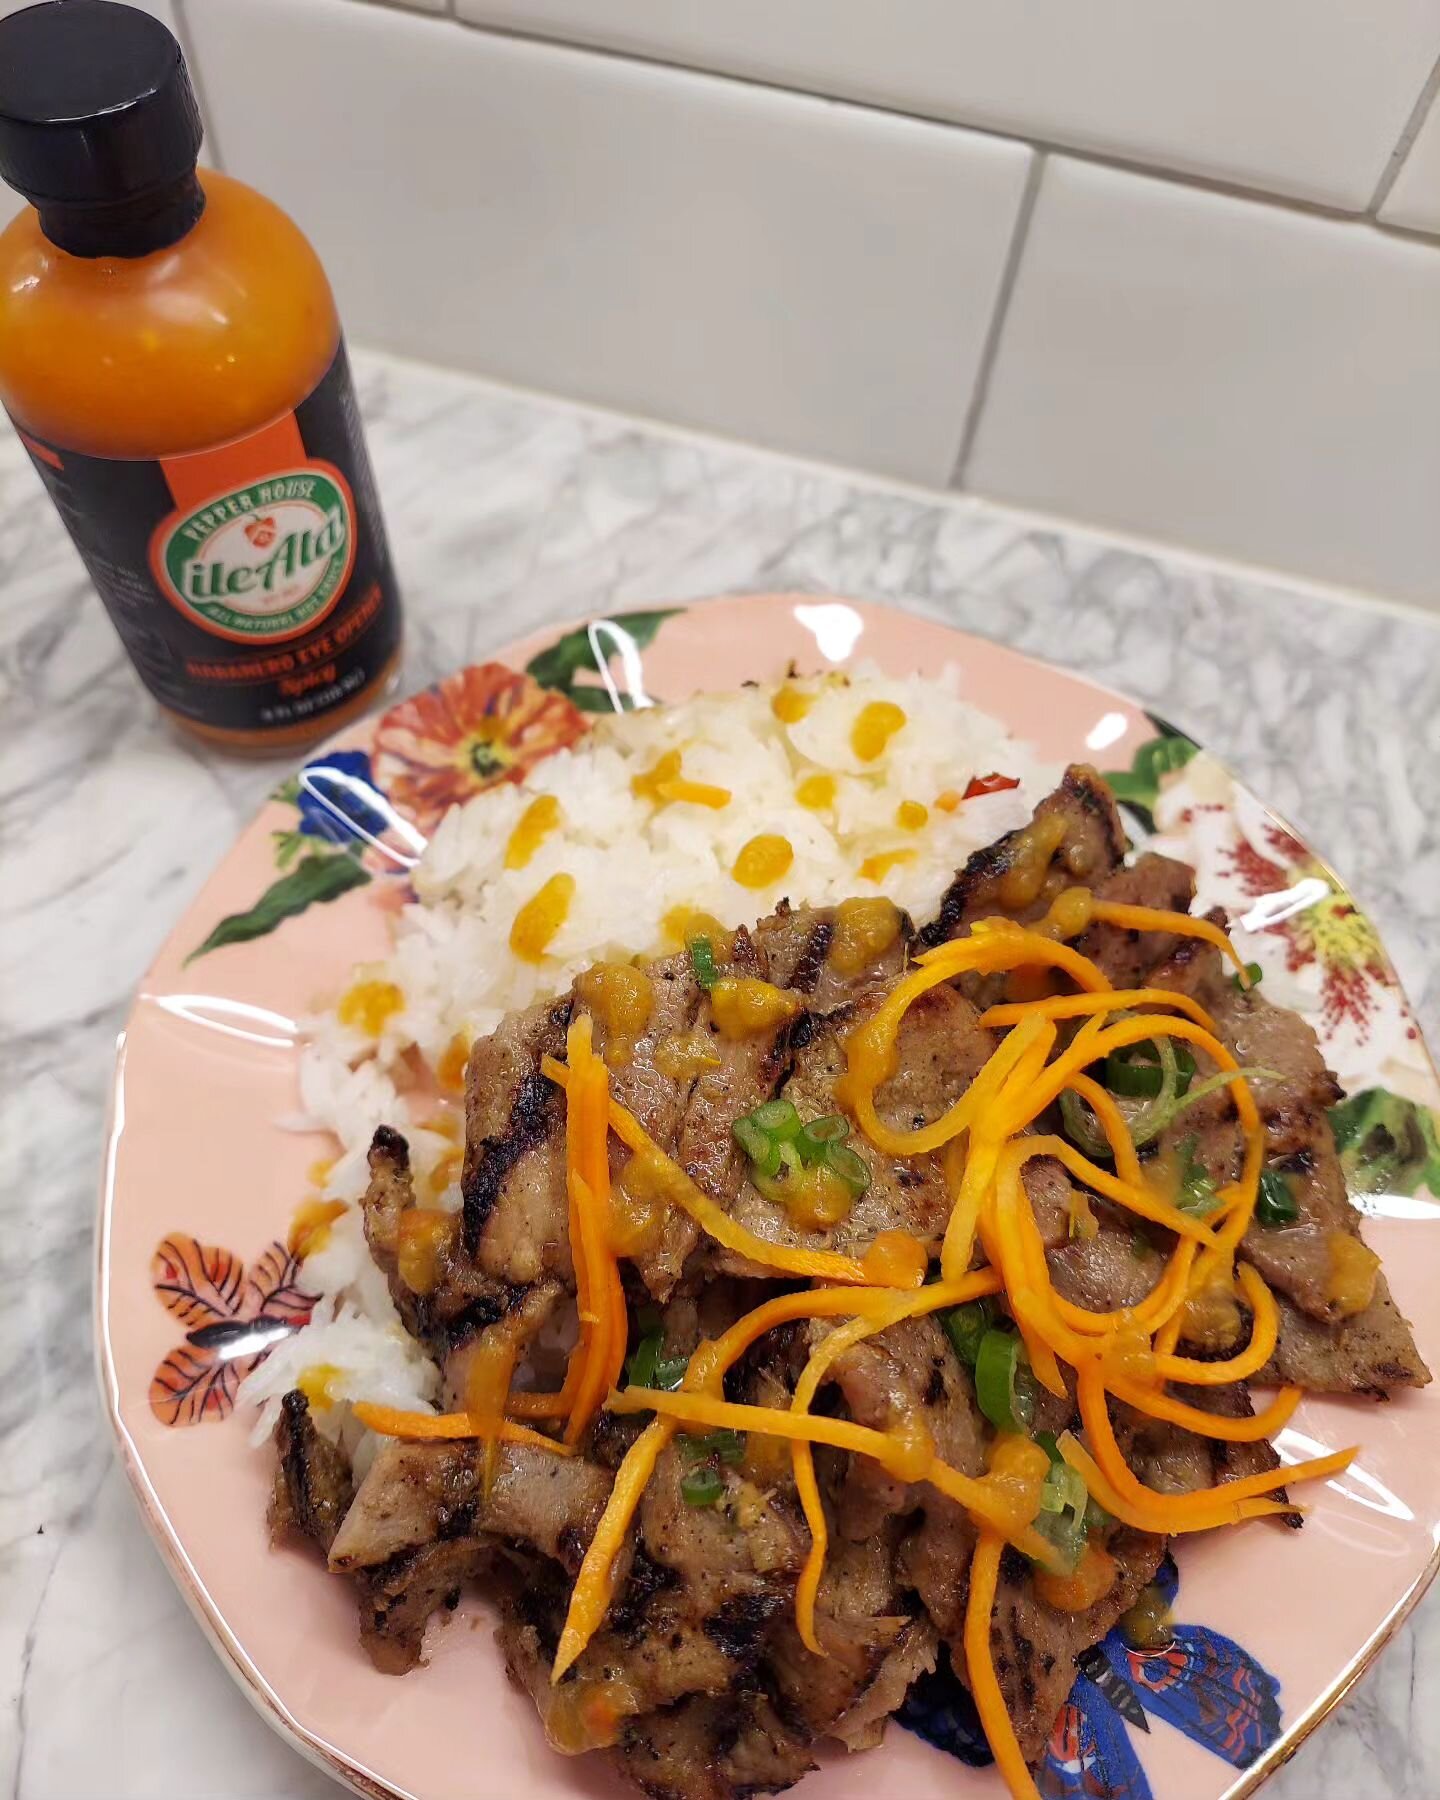 Grilled pork over rice gets some major heat and flavor with our hottest sauce: Habanero Eye Opener Spicy. #OrangeHotSauce #Spicy #SpicyHotSauce #FlavorUpgrade #FlavorWithAKick #HotAndSpicy #PorkAndRice #PorkOverRice #GrilledPork #HotSauce #HotSauceFo